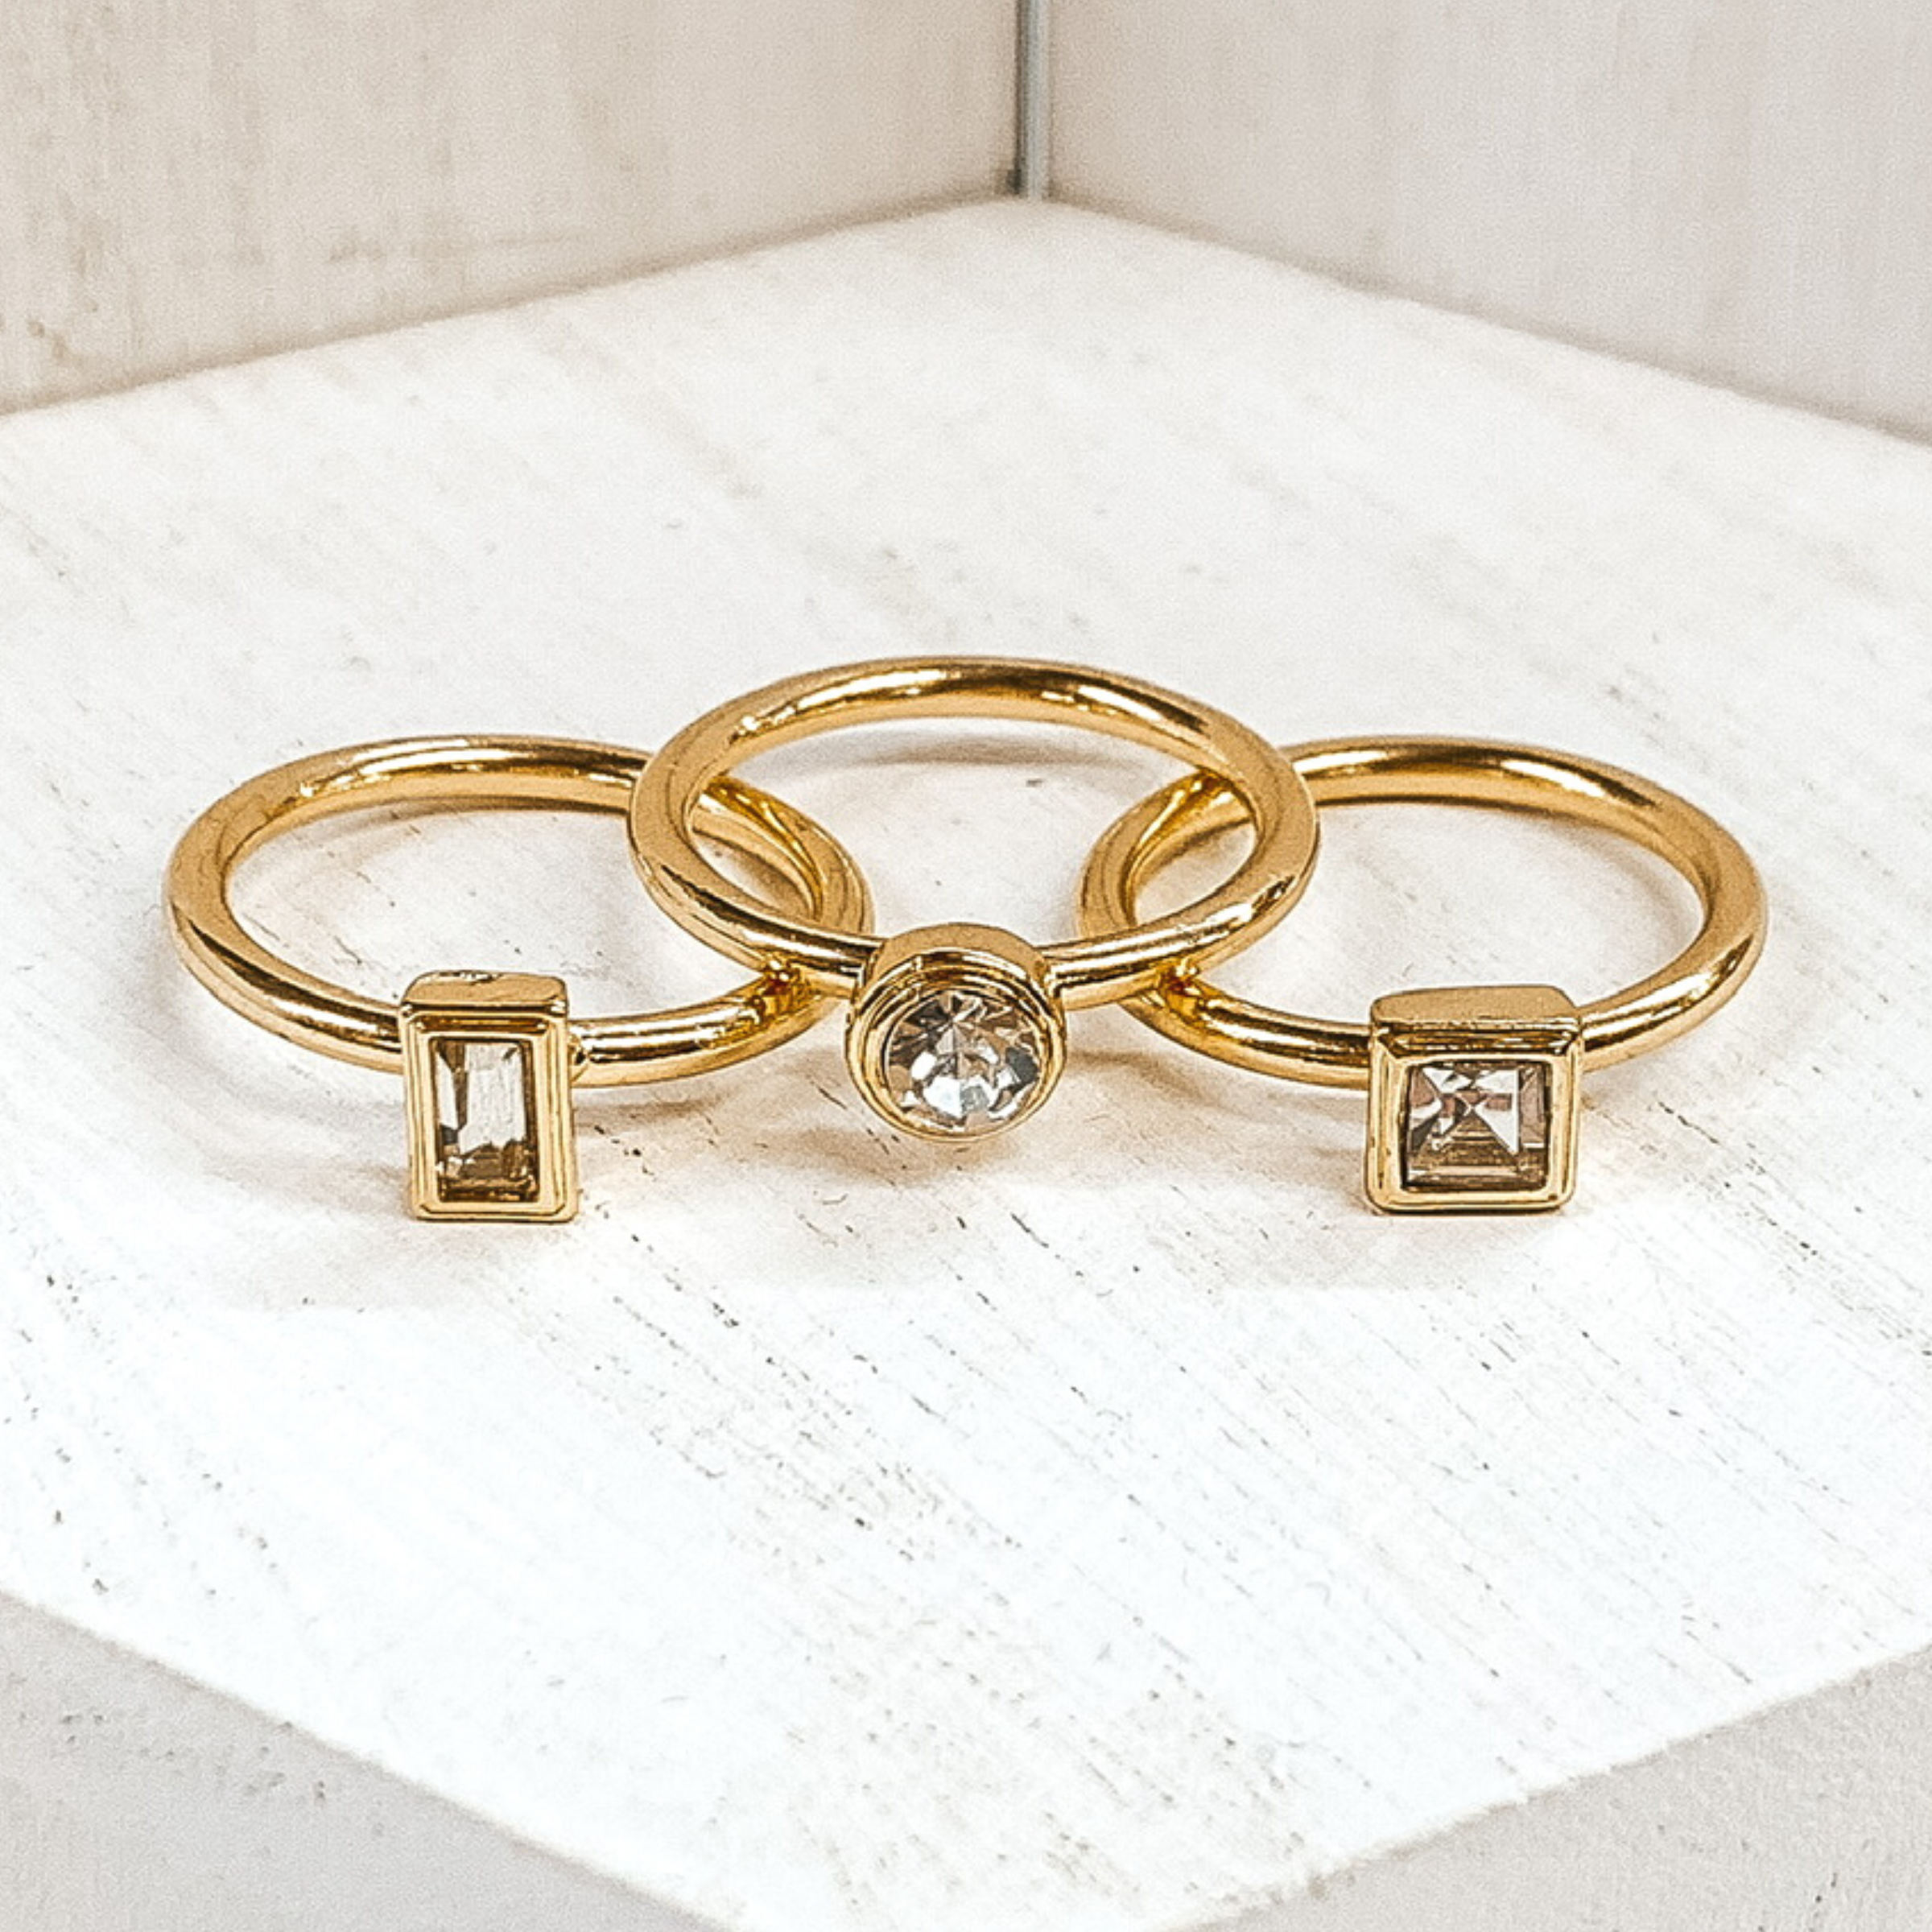 Set of three gold rings. One ring has a small rectangle clear crystal. Another ring has a circle clear crystal. The third ring has a square clear crystal. These rings are pictured on a white background. 